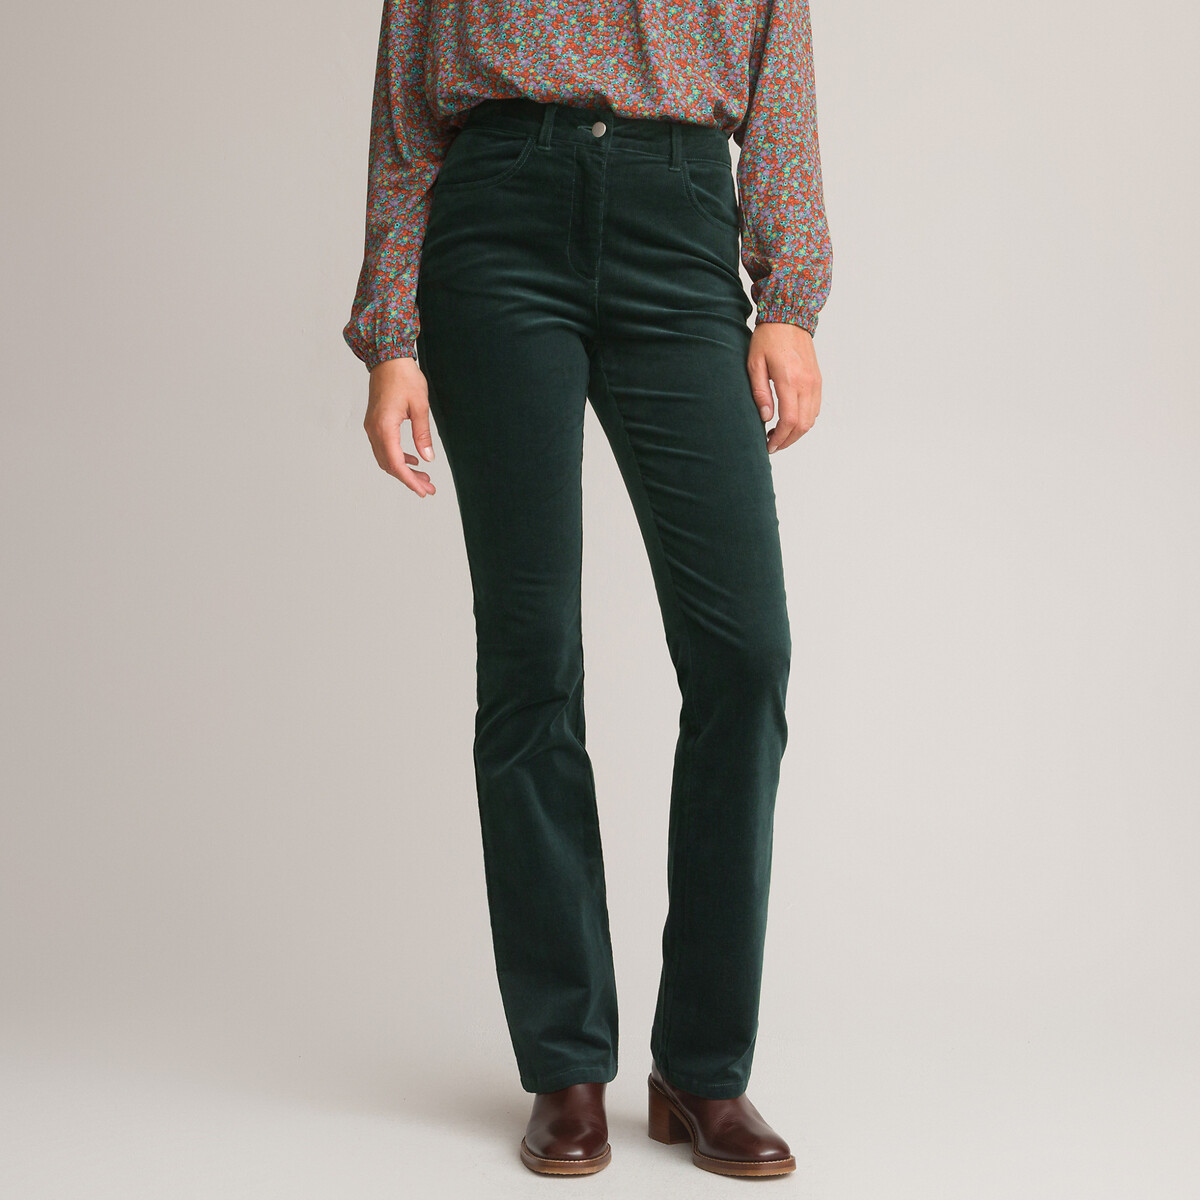 Image of Corduroy Bootcut Trousers, Length 31.5"